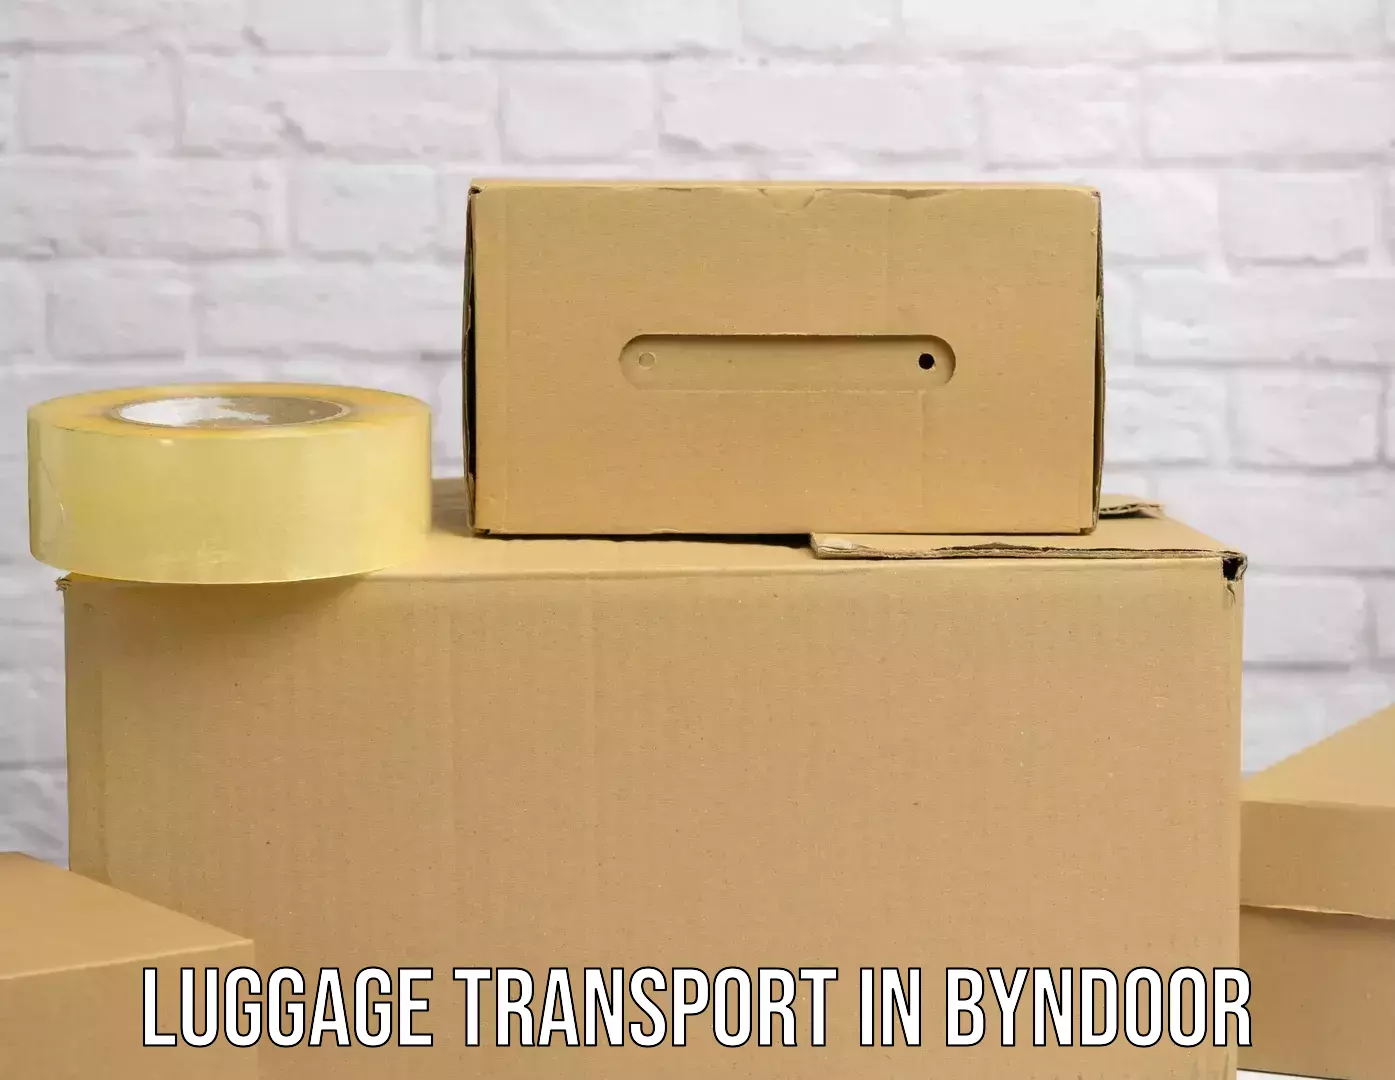 Luggage shipping service in Byndoor